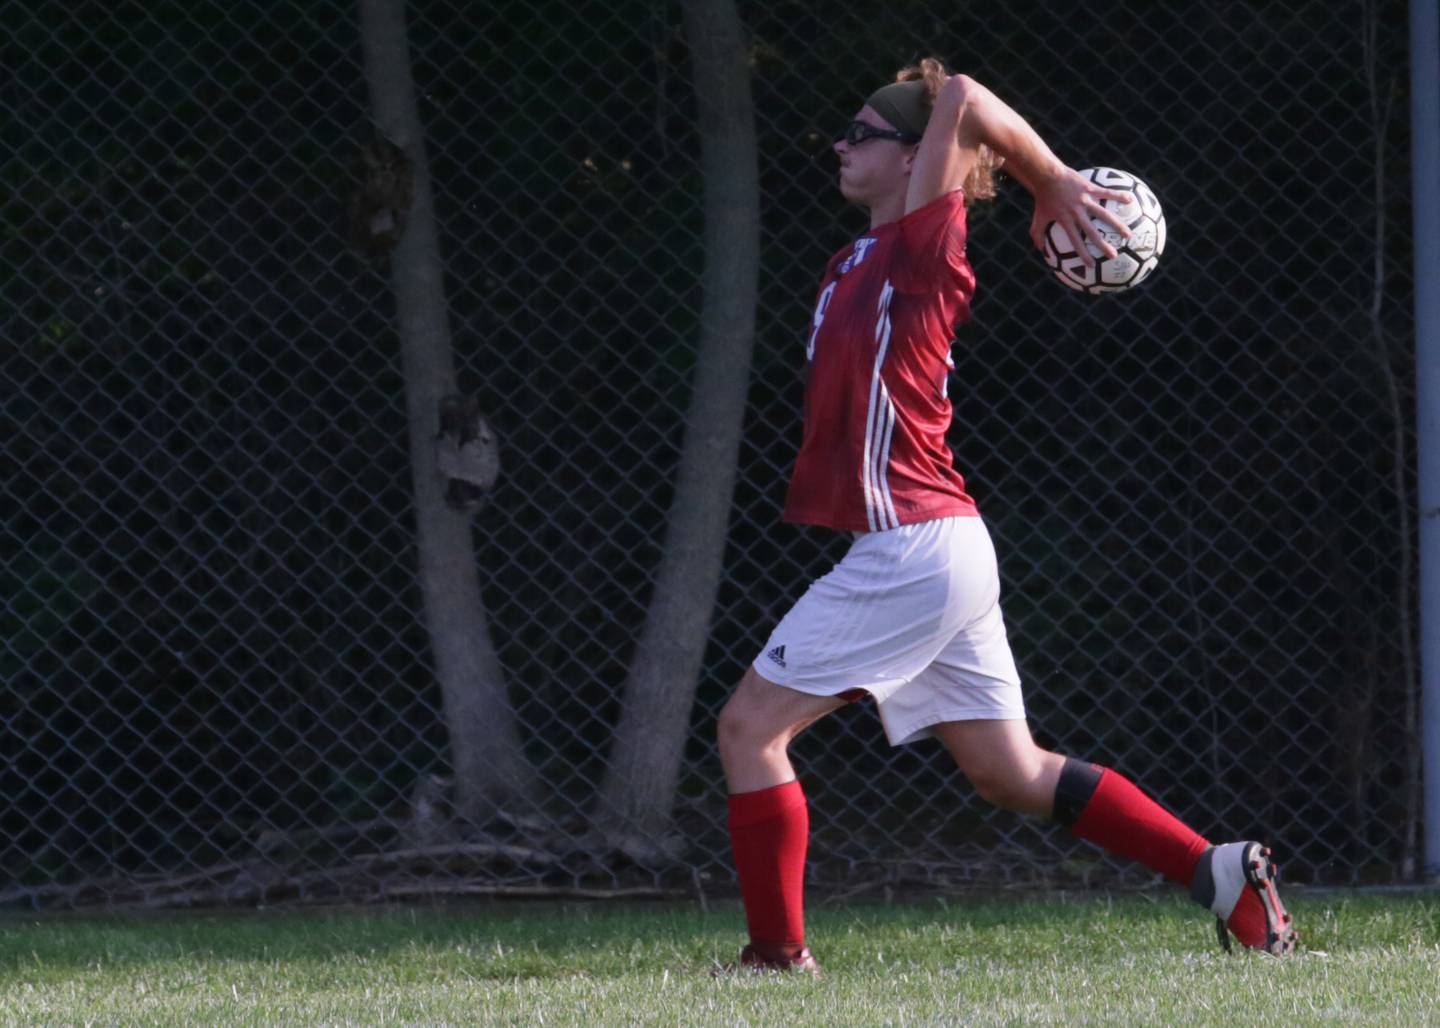 Streator's Connor Akin throws the ball in play against Peotone on Thursday, Sept. 15, 2022, in Streator.